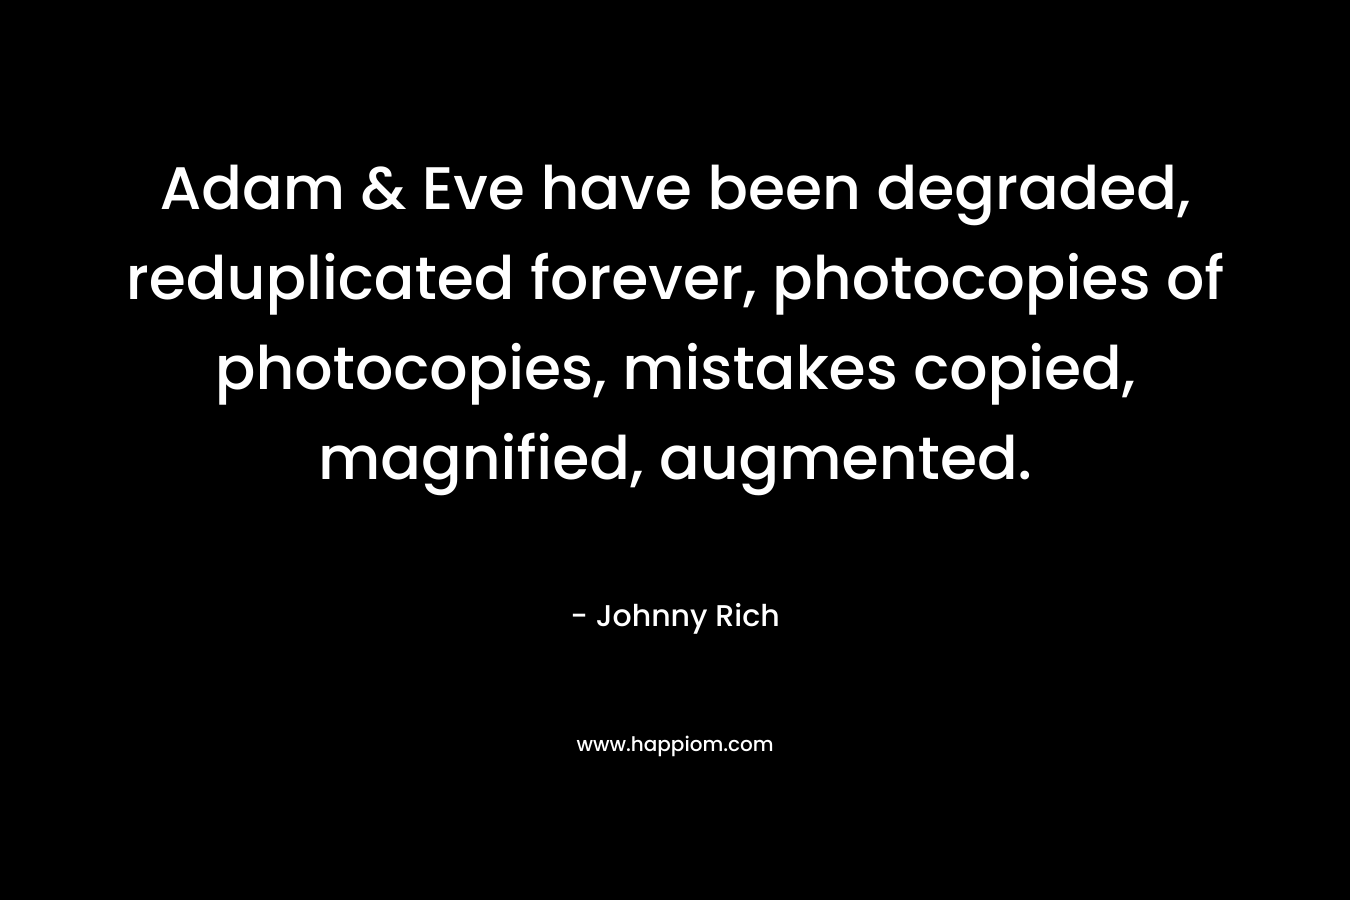 Adam & Eve have been degraded, reduplicated forever, photocopies of photocopies, mistakes copied, magnified, augmented. – Johnny Rich